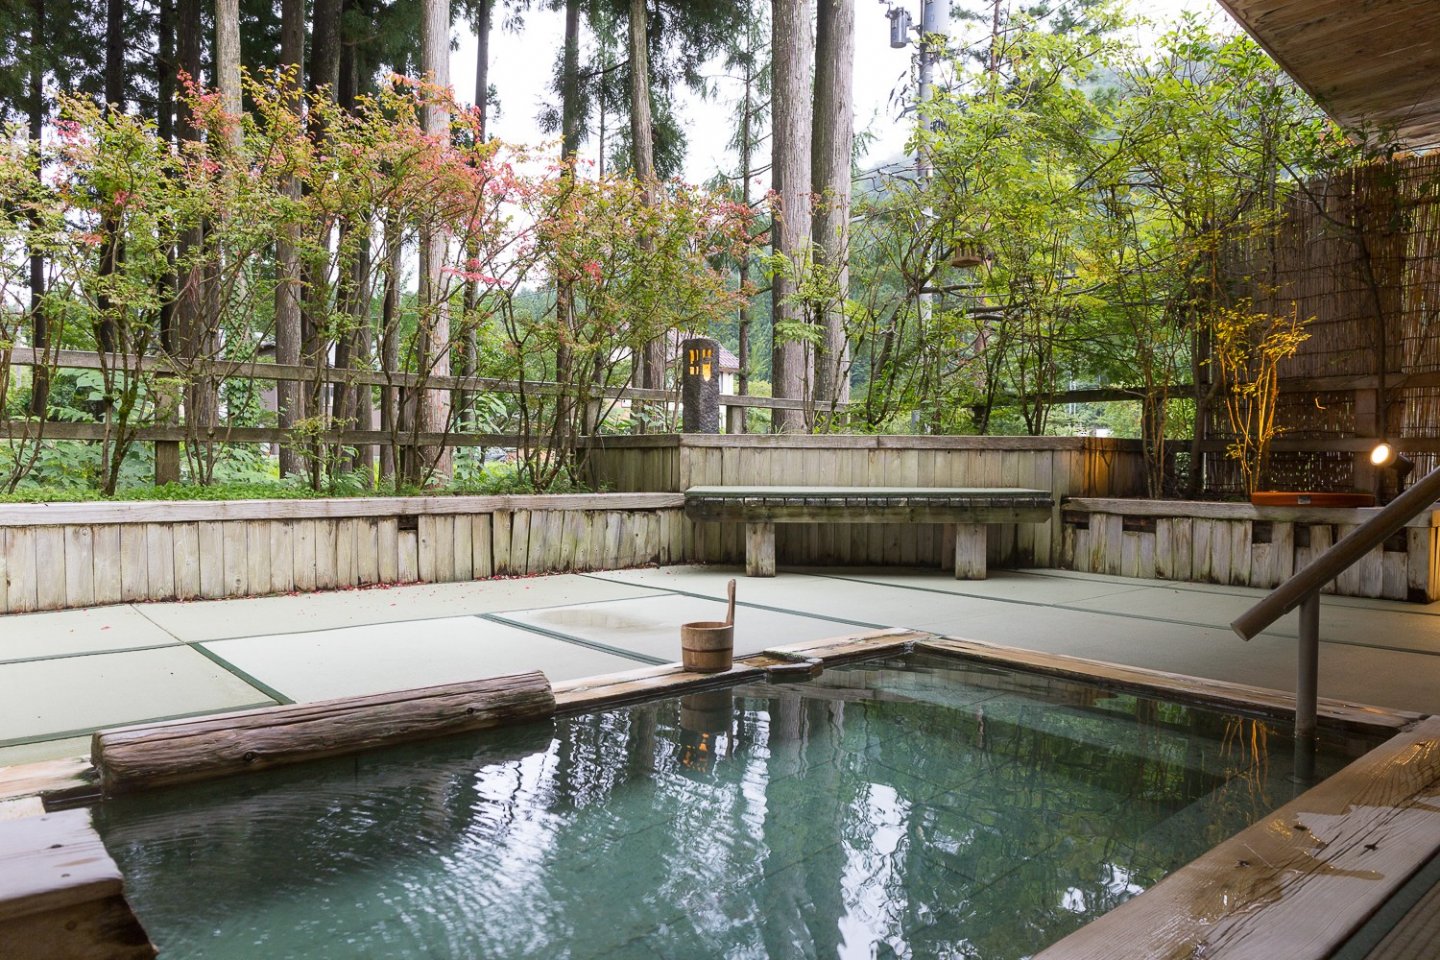 The men's outdoor onsen at the Roan offers a beautiful view of the forest